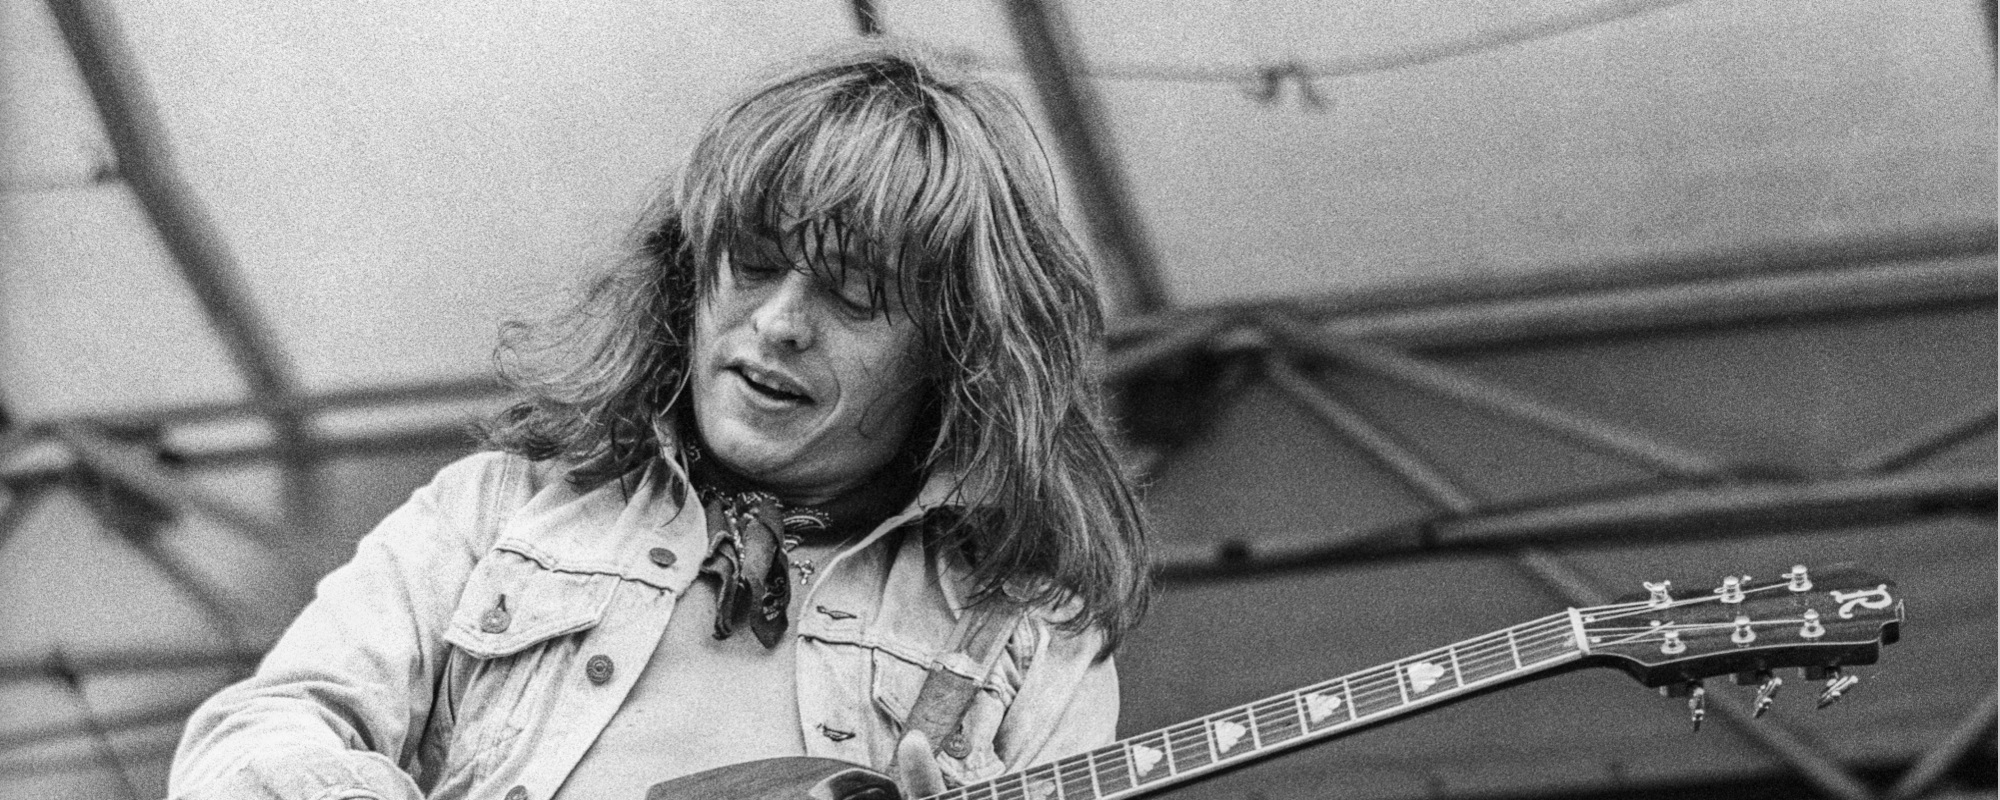 The Often Overshadowed Meaning Behind “Rock and Roll, Hoochie Koo” by Rick Derringer